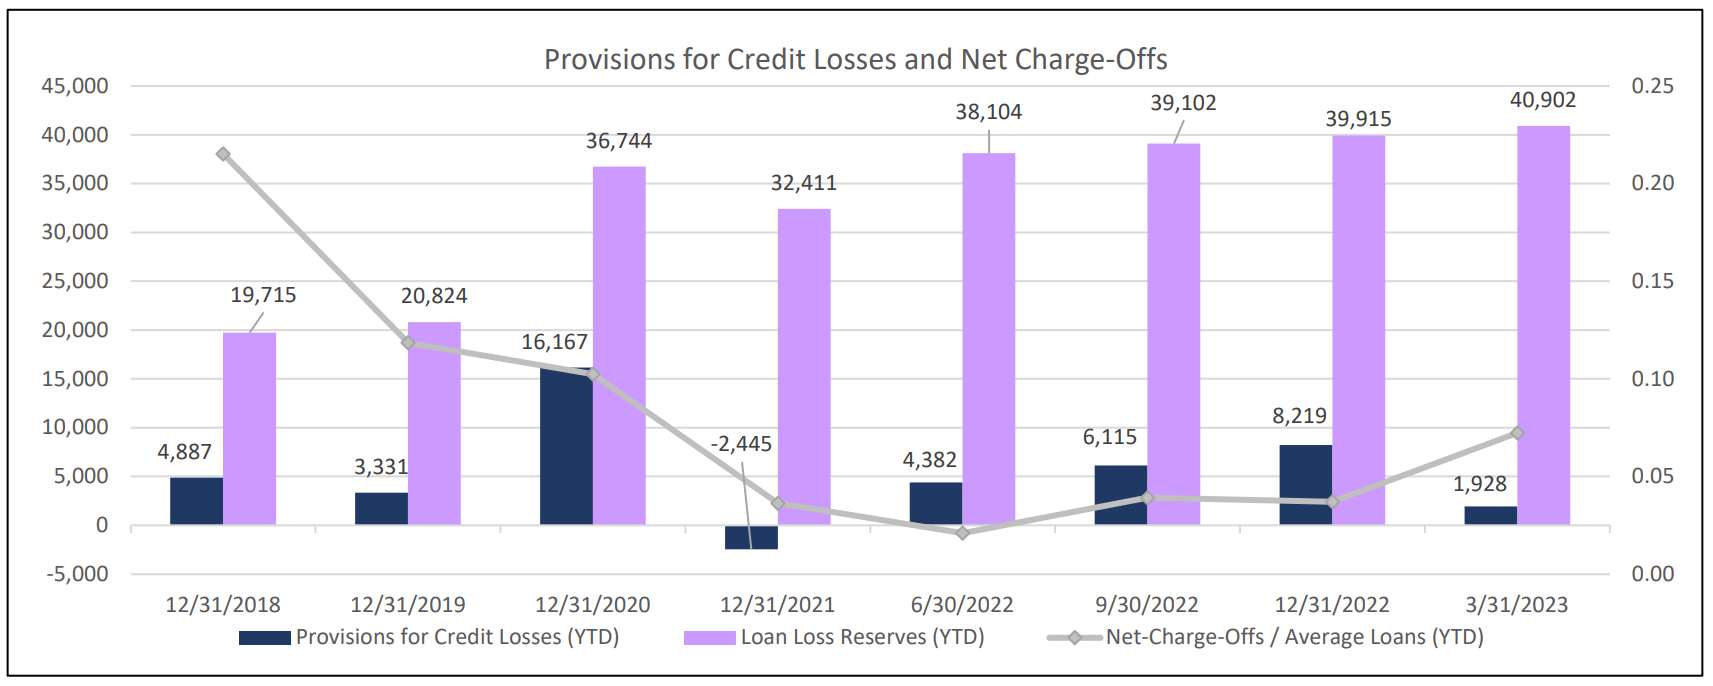 Provisions for Credit Losses and Net Charge-Offs